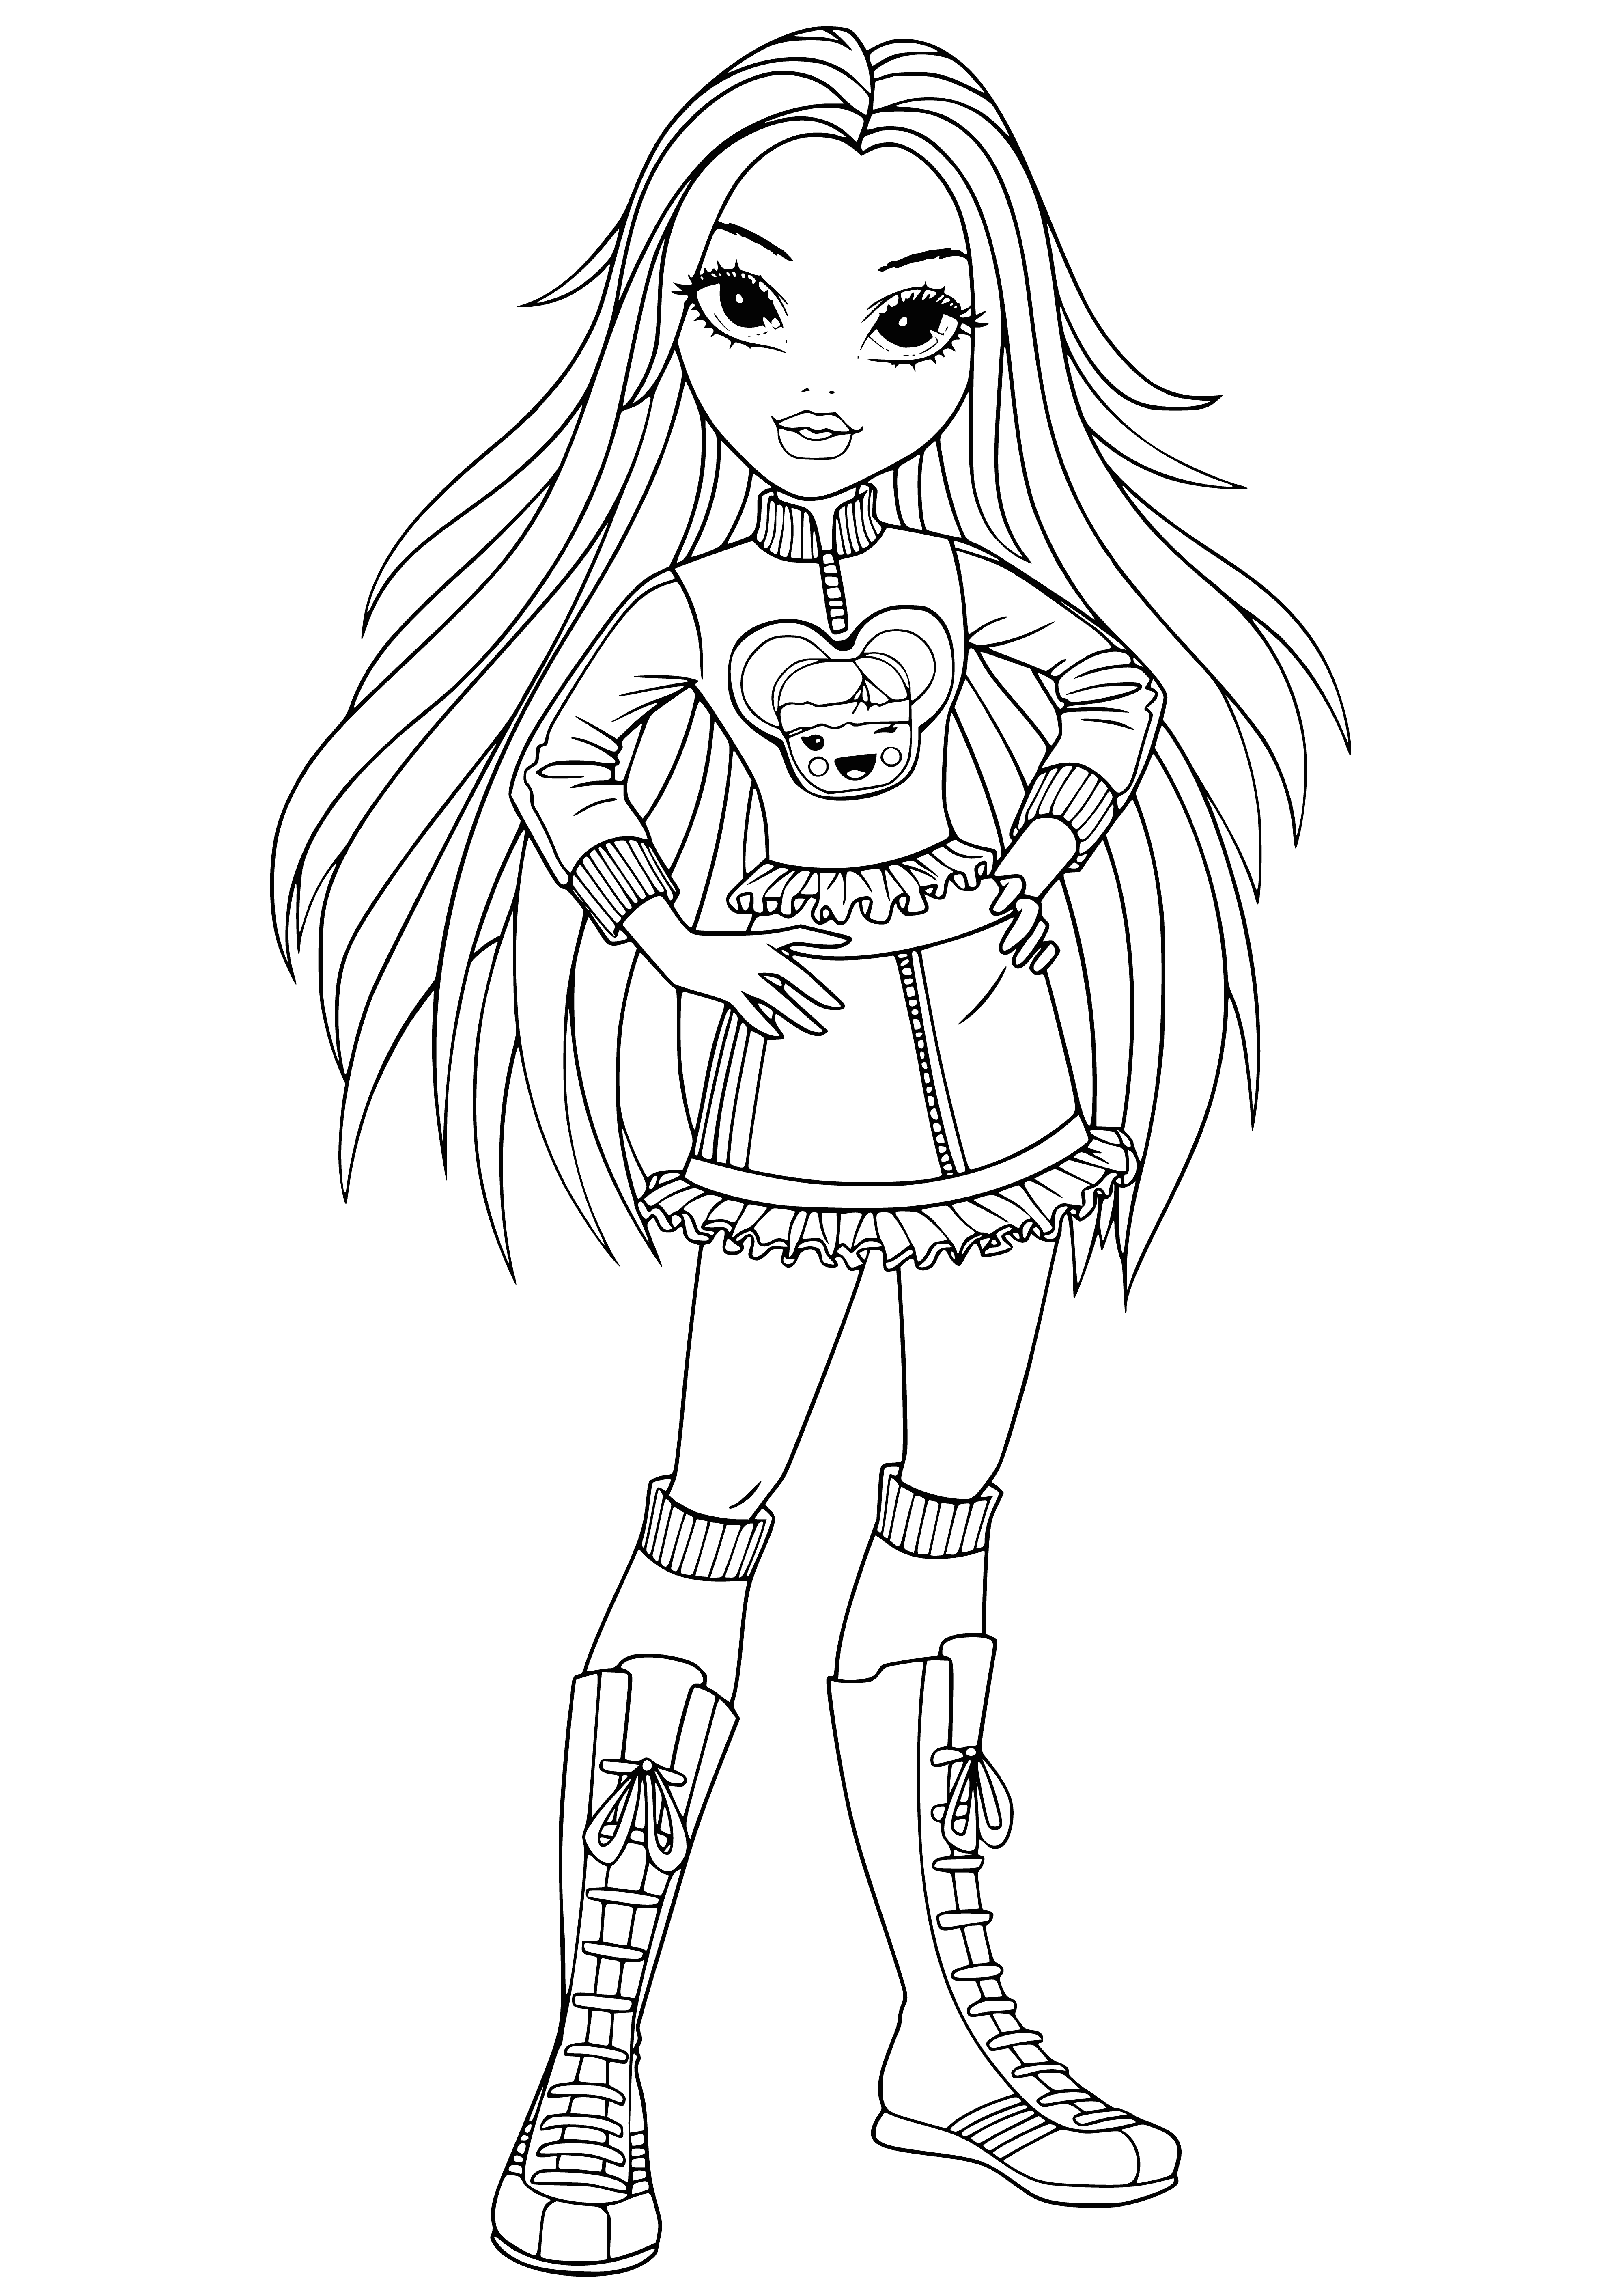 coloring page: Avery is a go-getter with big dreams, always ready to try something new and supported by good friends.